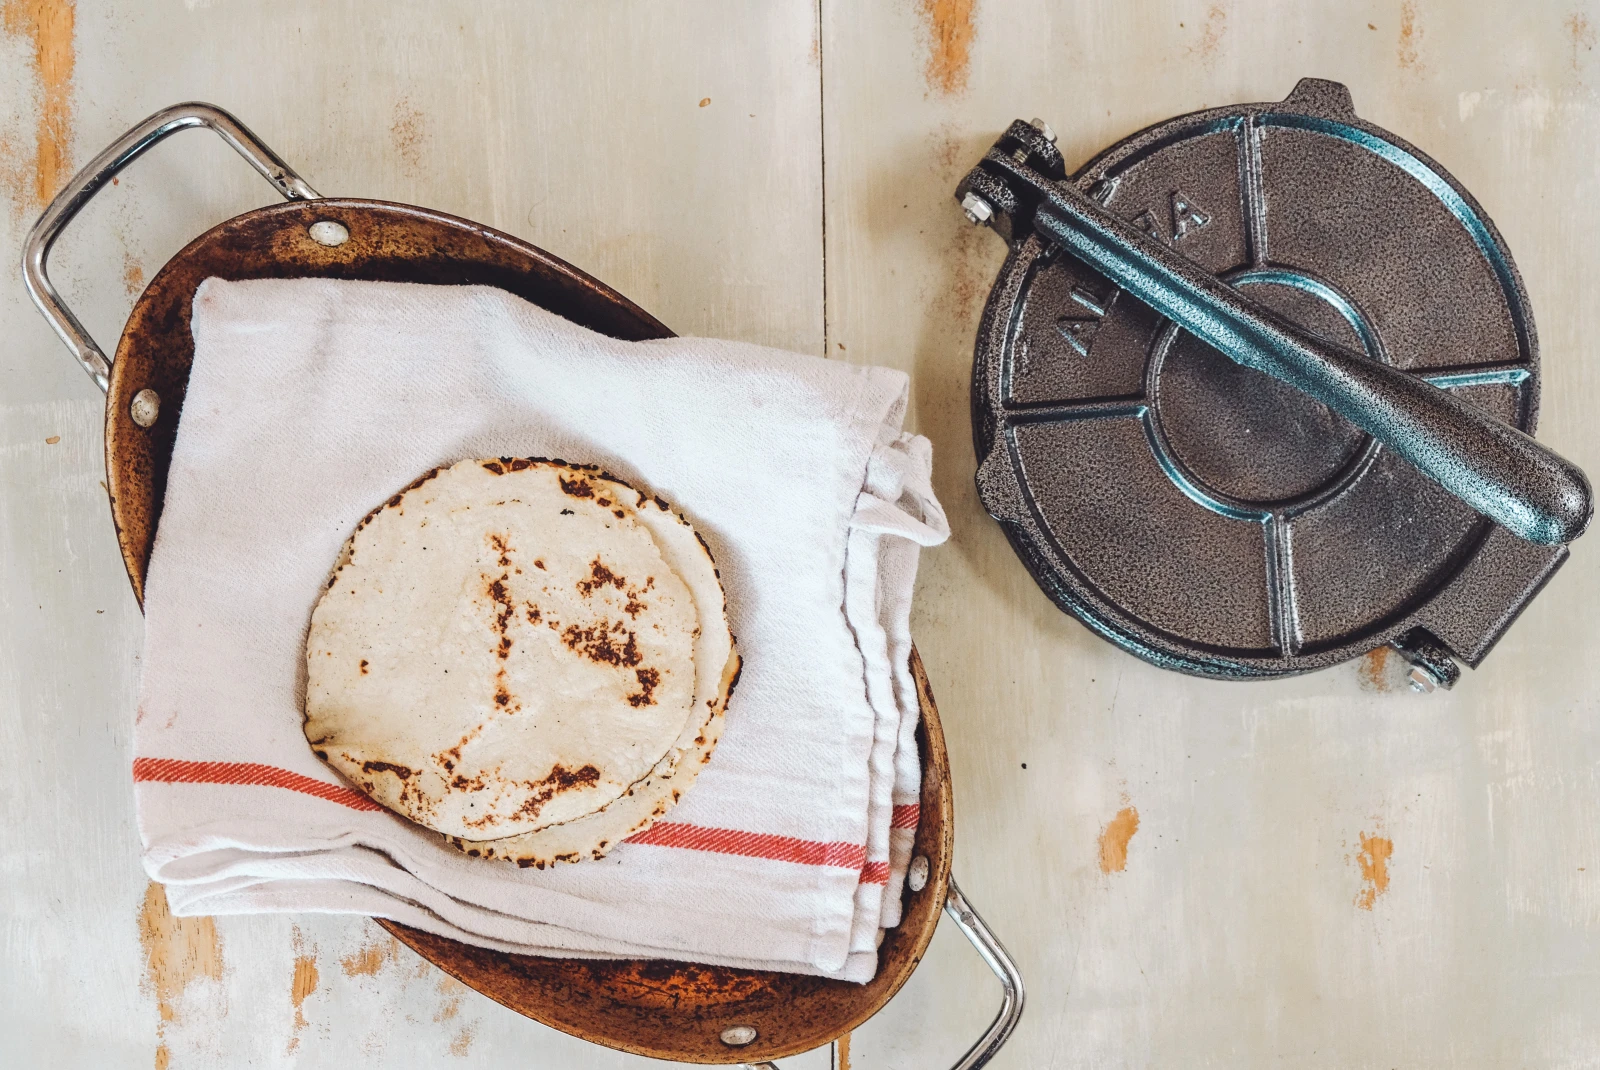 Tortillas on a white kitchen towel in a pan next to a cast iron tortilla press